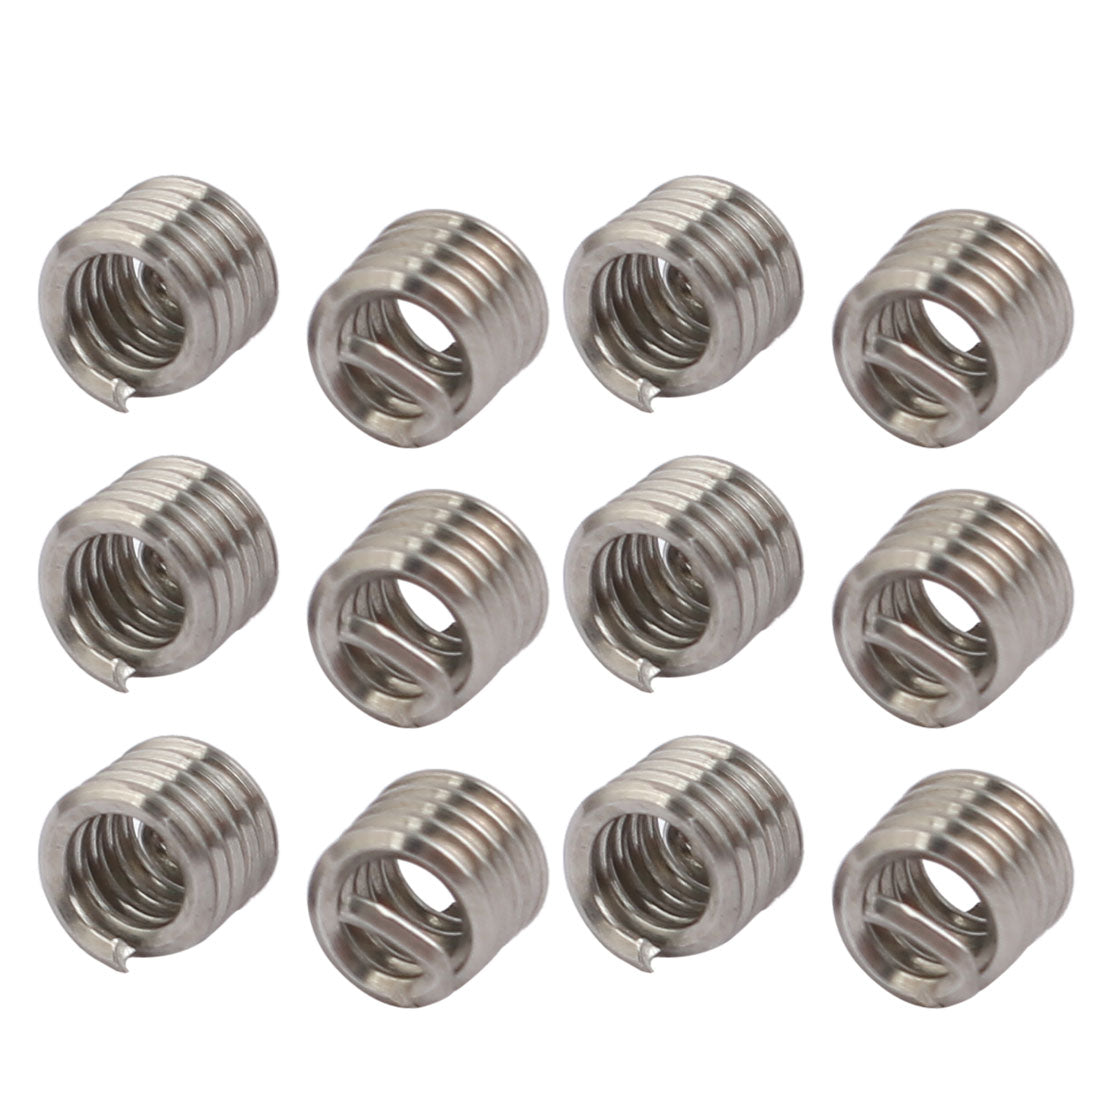 uxcell Uxcell #4-40x0.168" 304 Stainless Steel Helical Coil Wire Thread Insert 12pcs